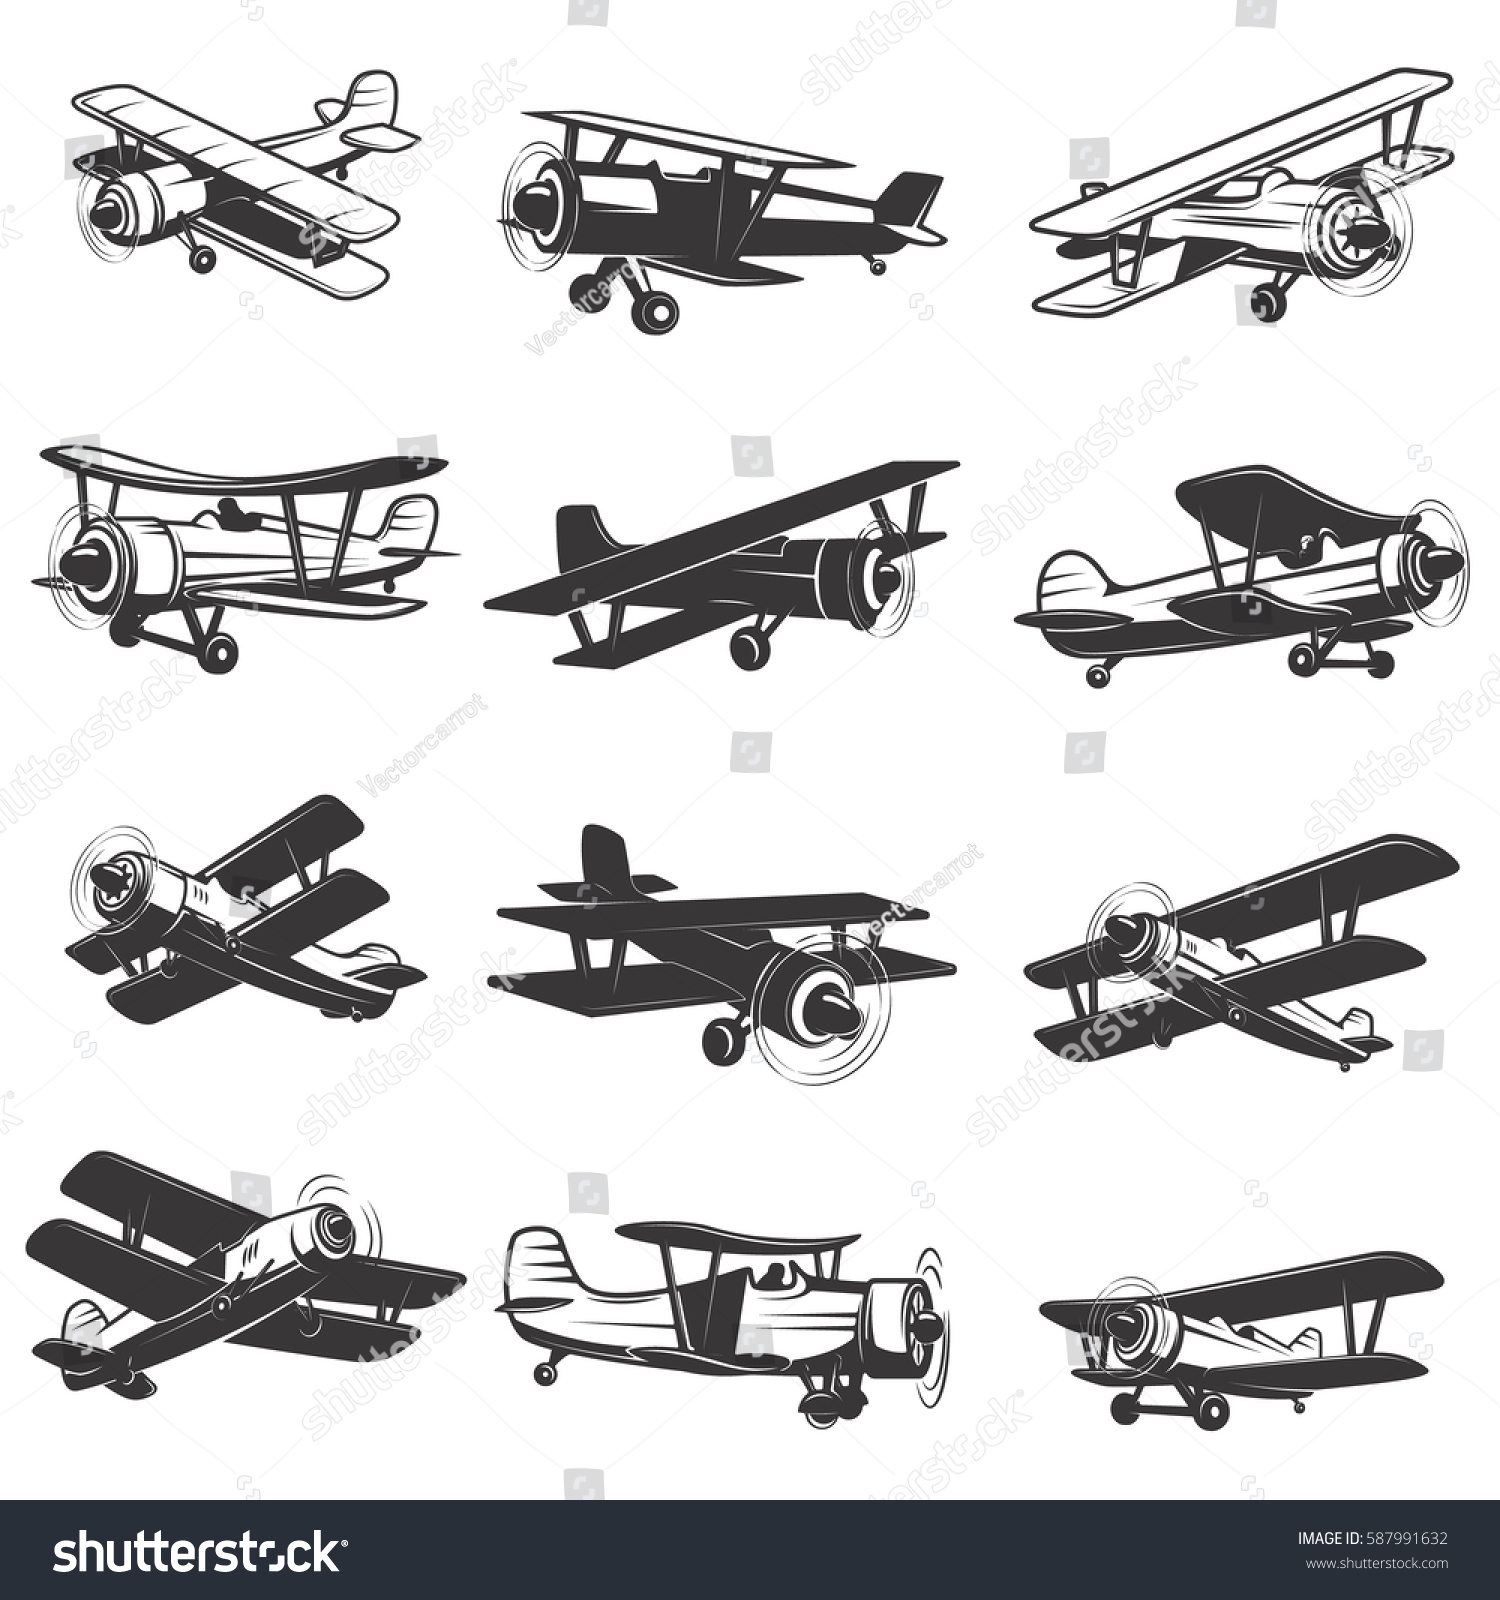 Set Vintage Airplanes Icons Aircraft Illustrations Stock Vector ...